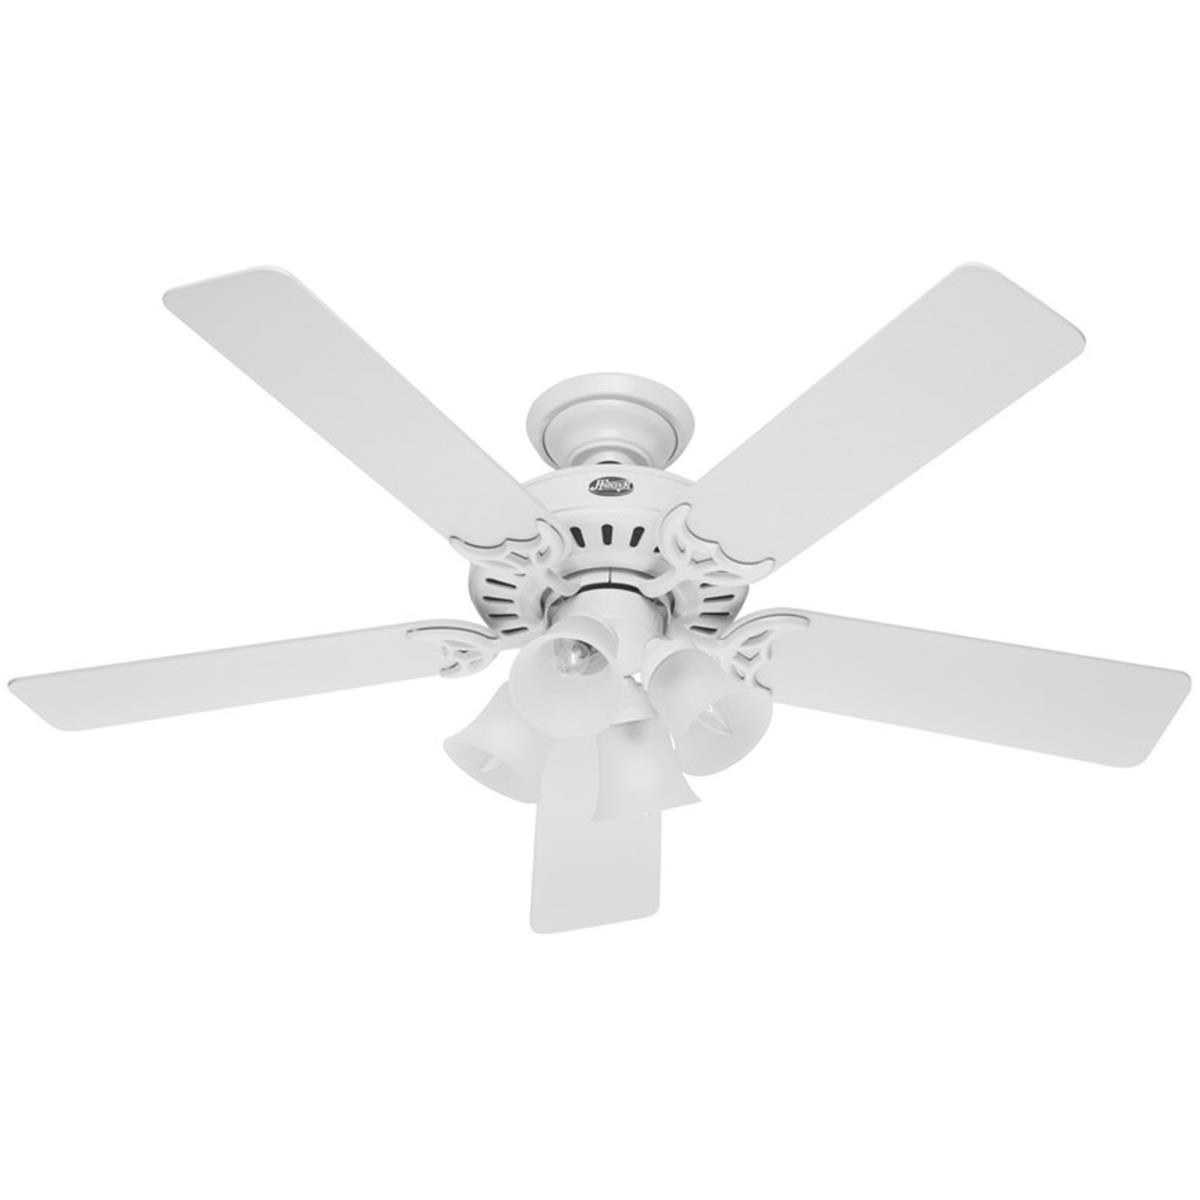 53062 Ceiling Fan With Blades And Light Kit, White